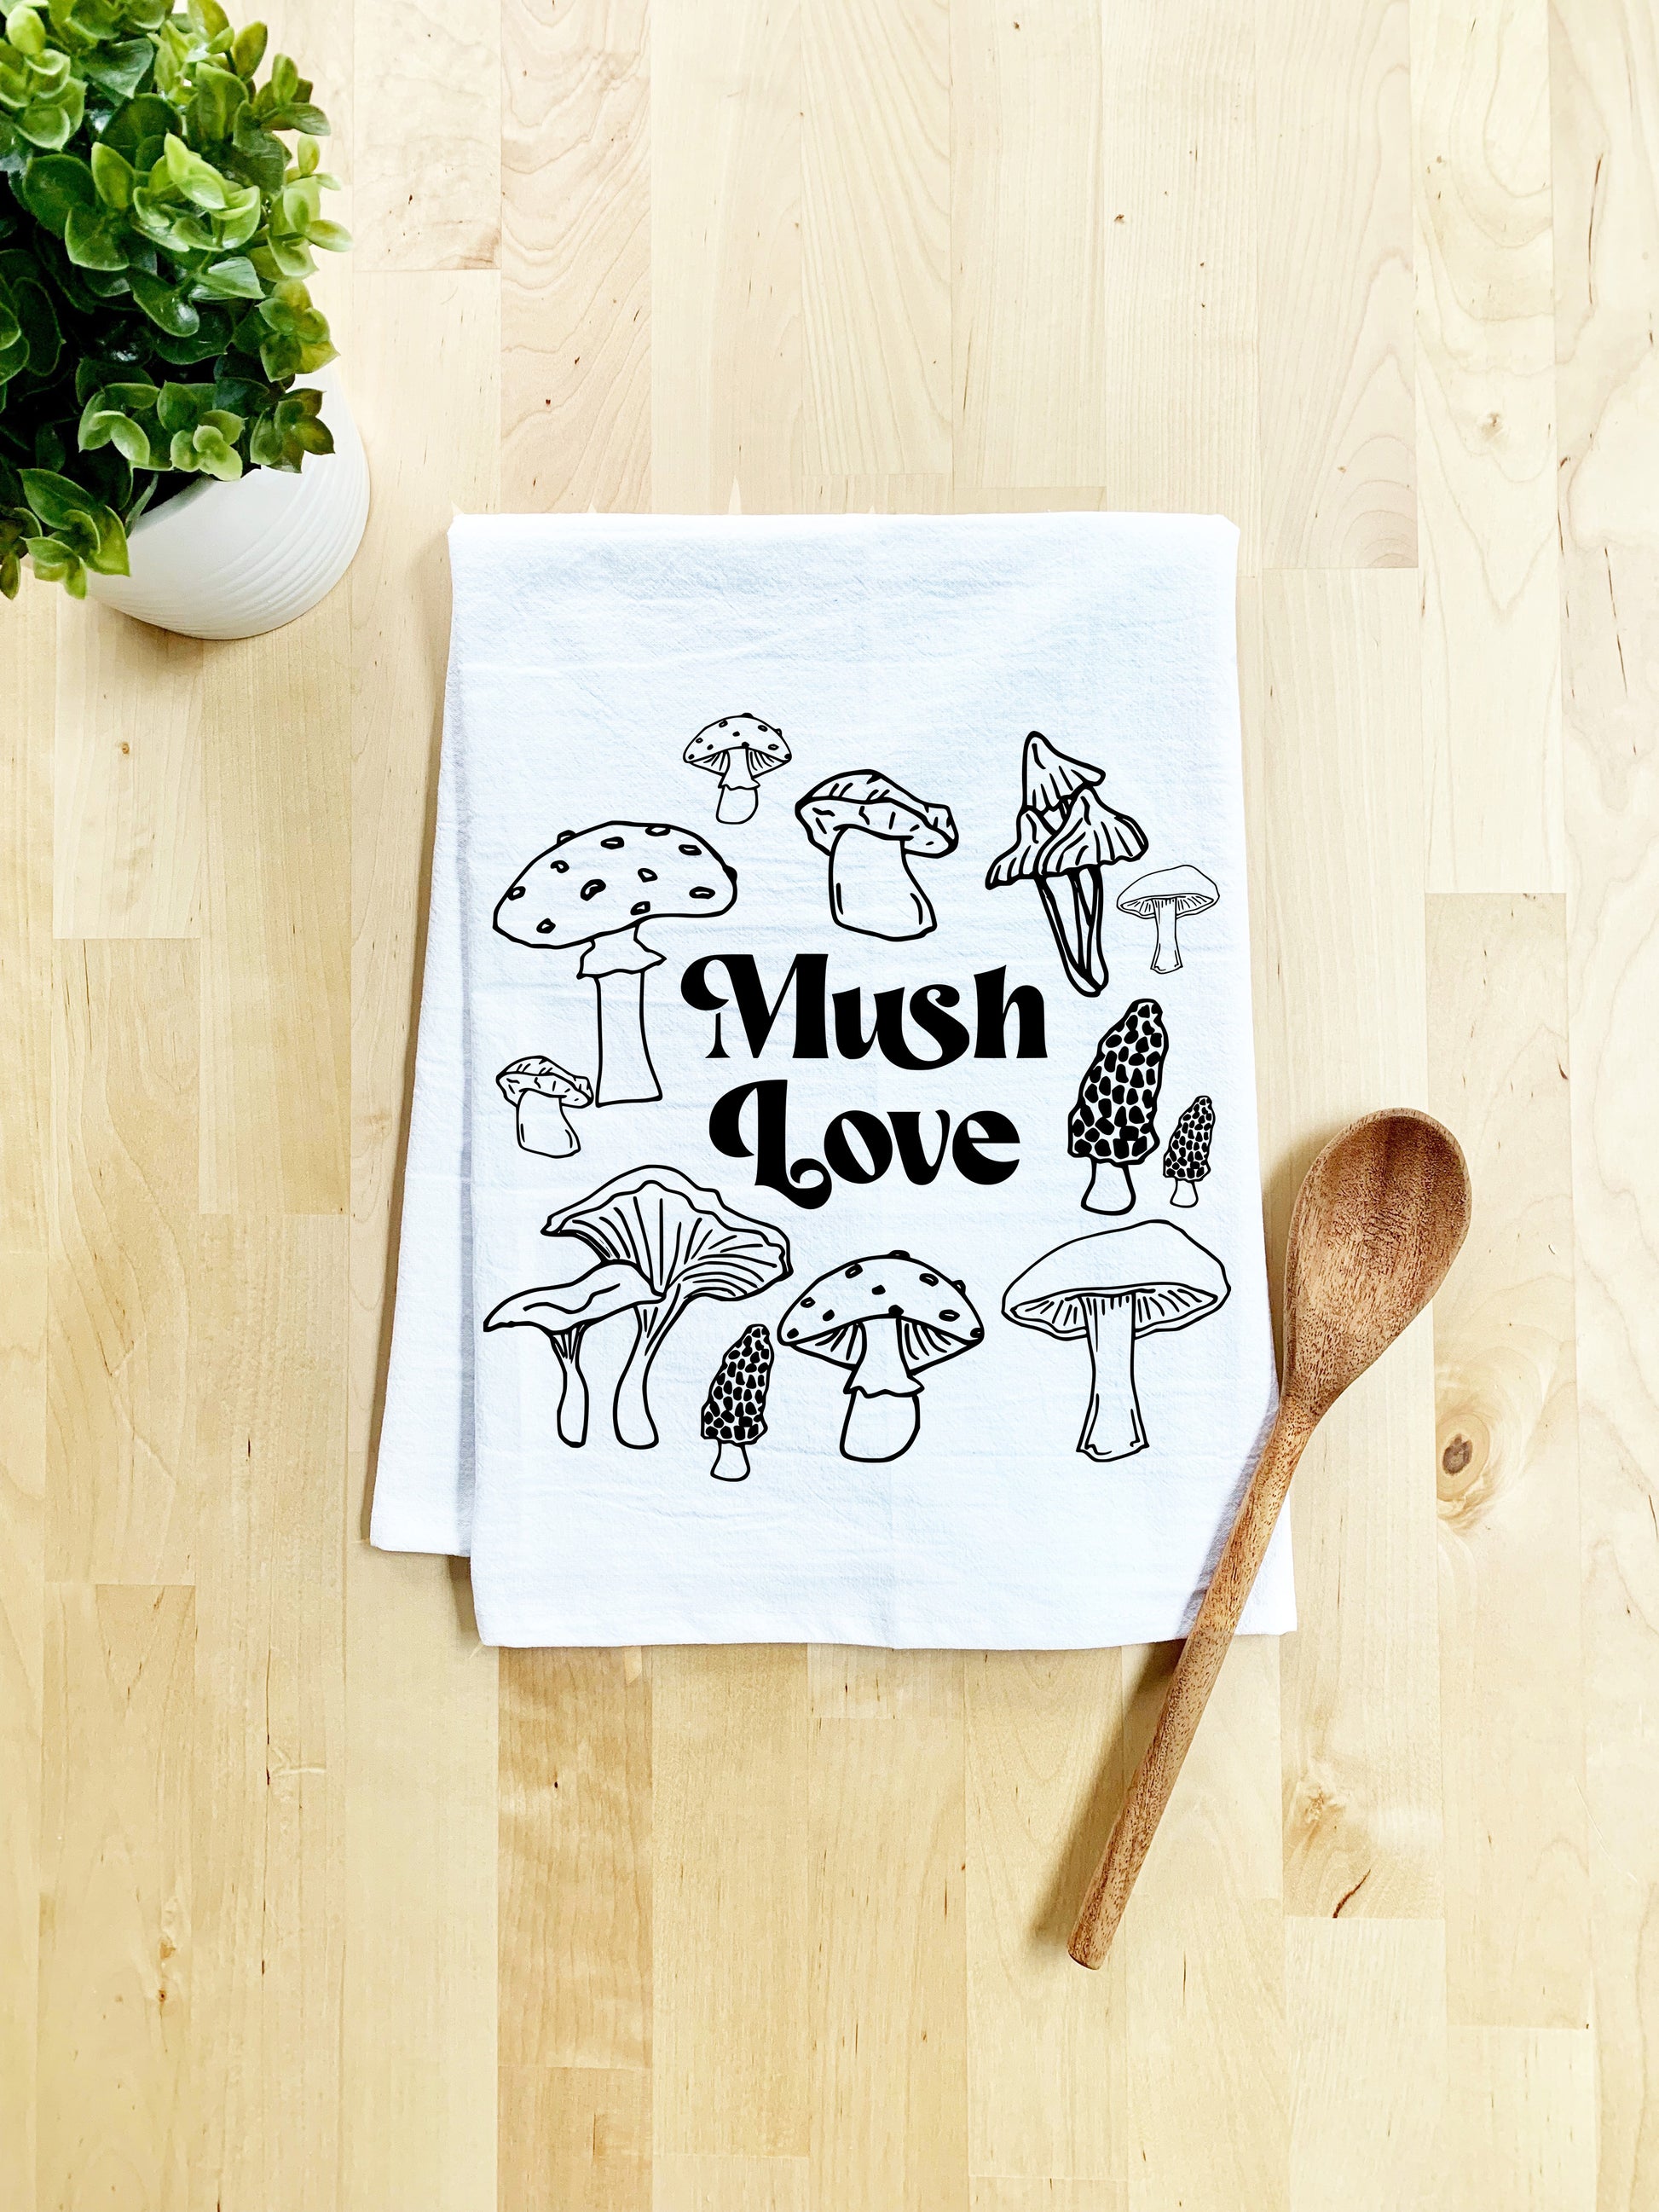 a dish towel with mushrooms printed on it